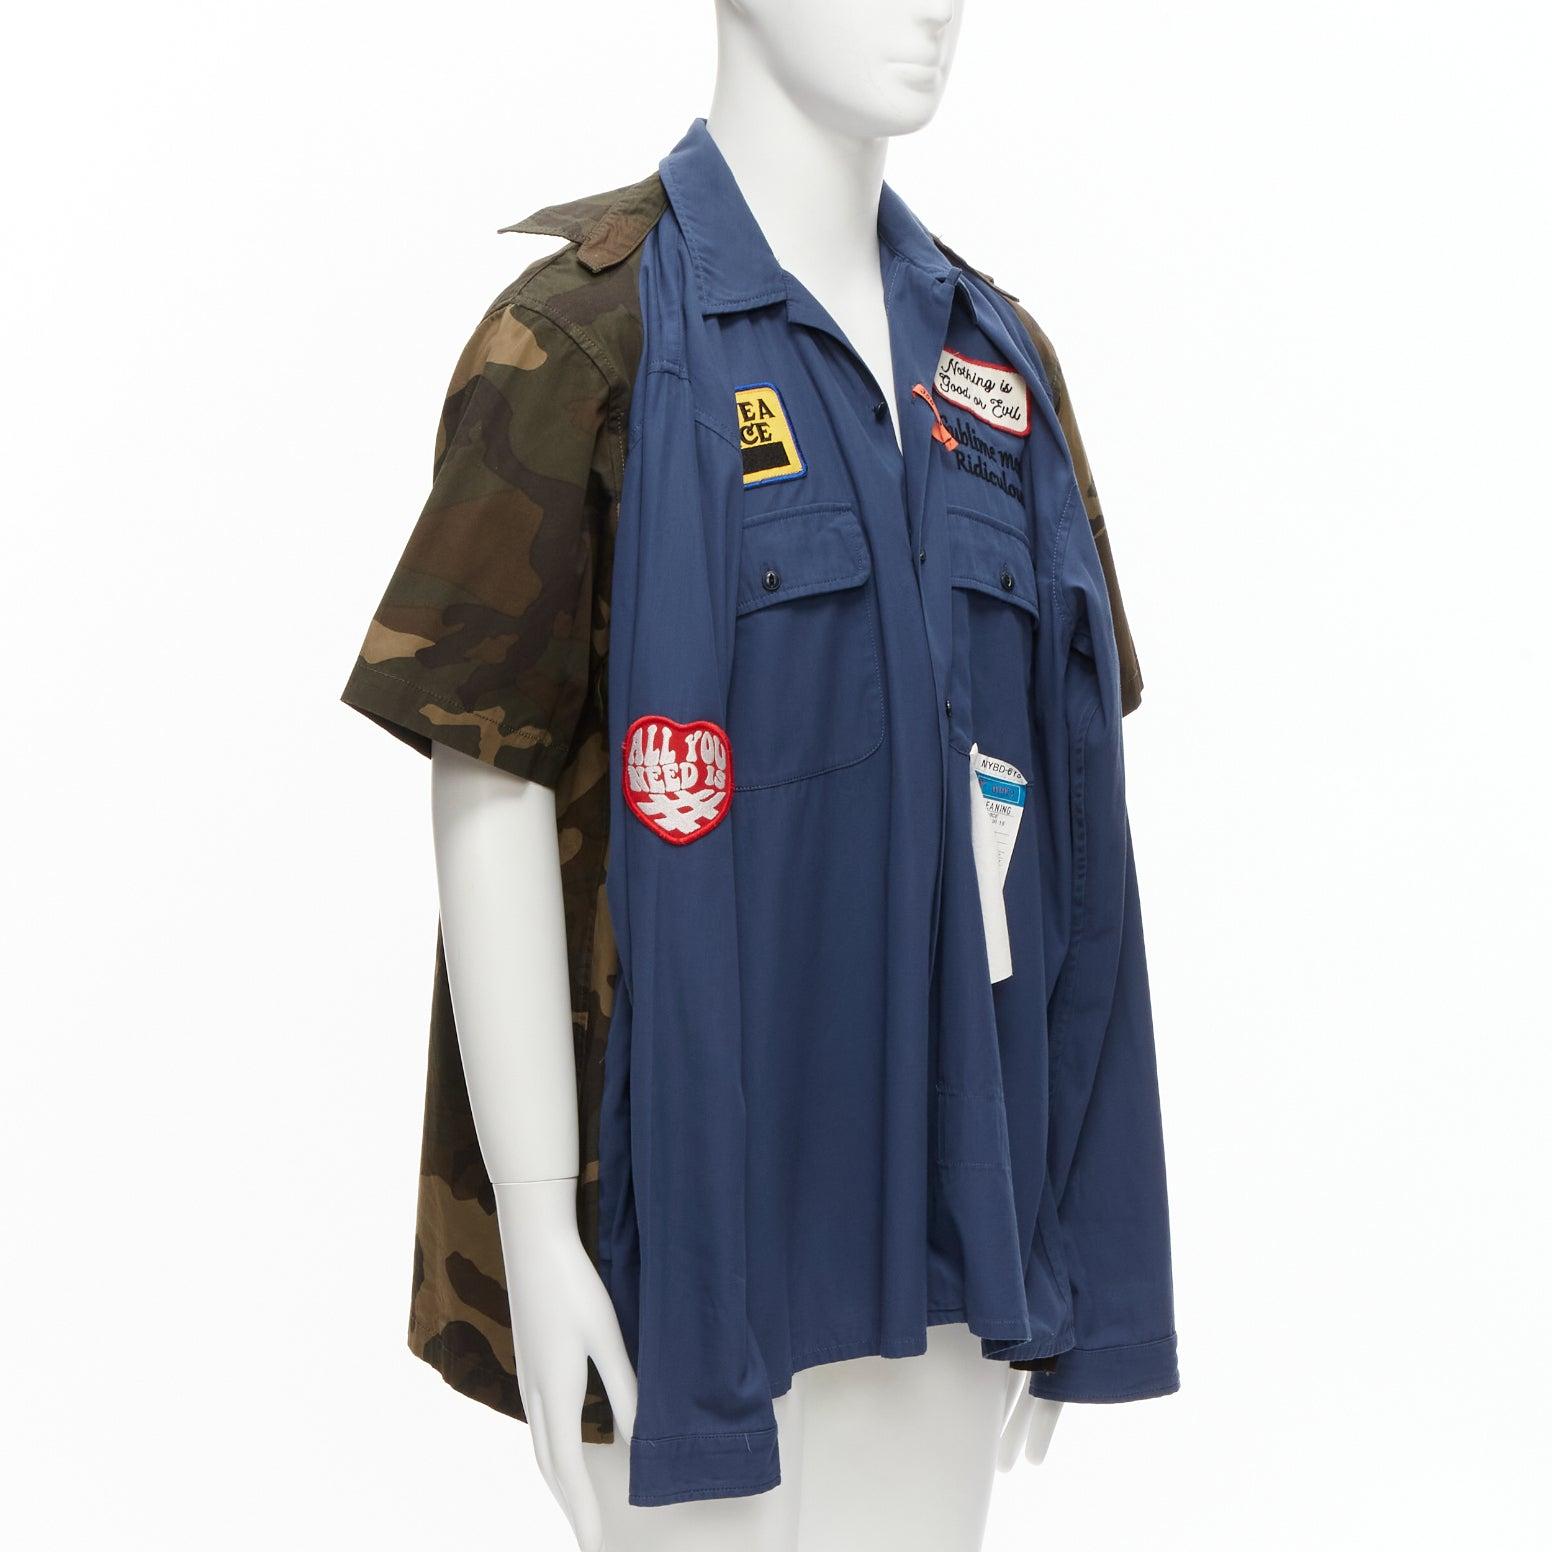 MIHARA YASUHIRO blue navy vintage badge 2-in-1 hybrid shirt IT48 M
Reference: JSLE/A00013
Brand: Mihara Yasuhiro
Material: Cotton
Color: Blue, Green
Pattern: Camouflage
Closure: Button
Extra Details: Two way shirt. Camo print at back.
Made in: